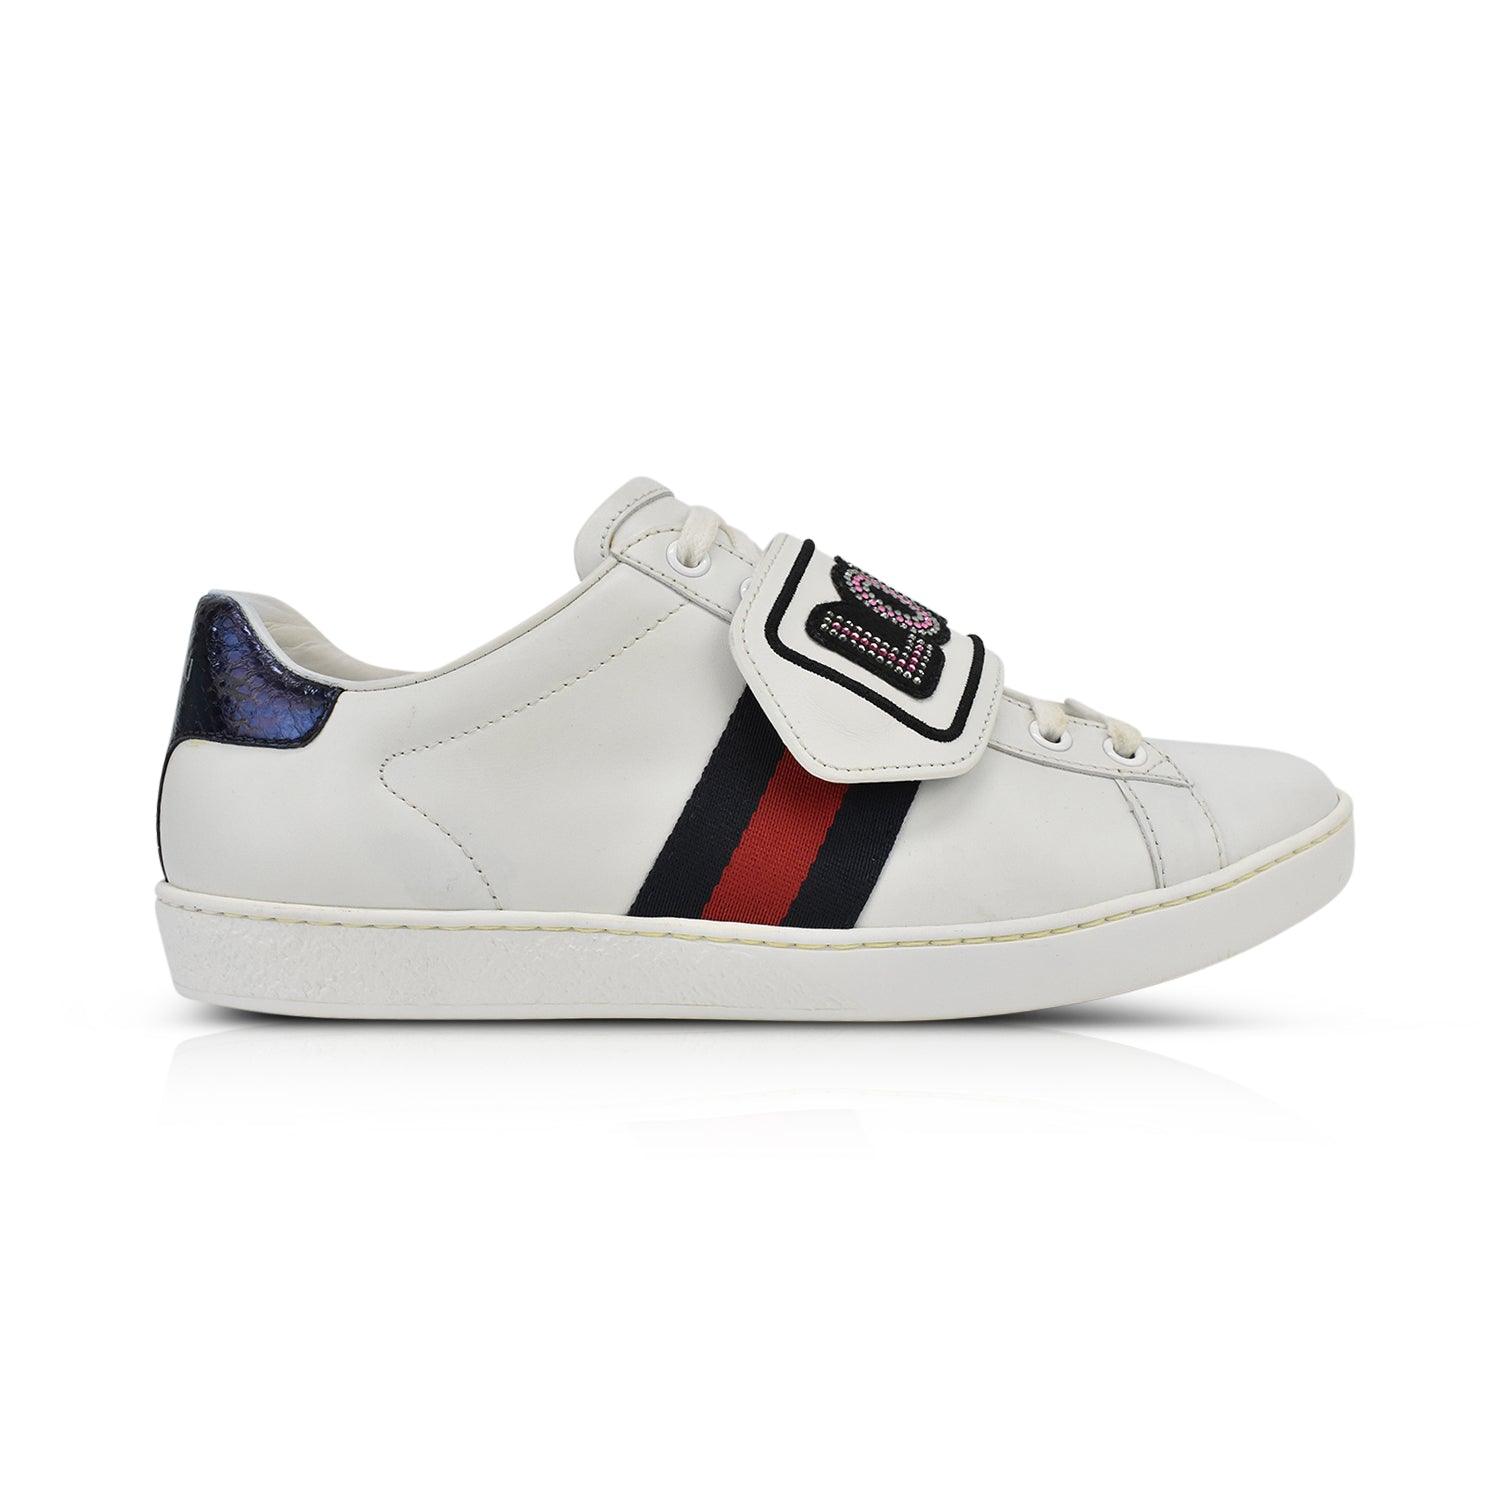 Gucci 'Loved' Sneakers - Women's 37.5 - Fashionably Yours